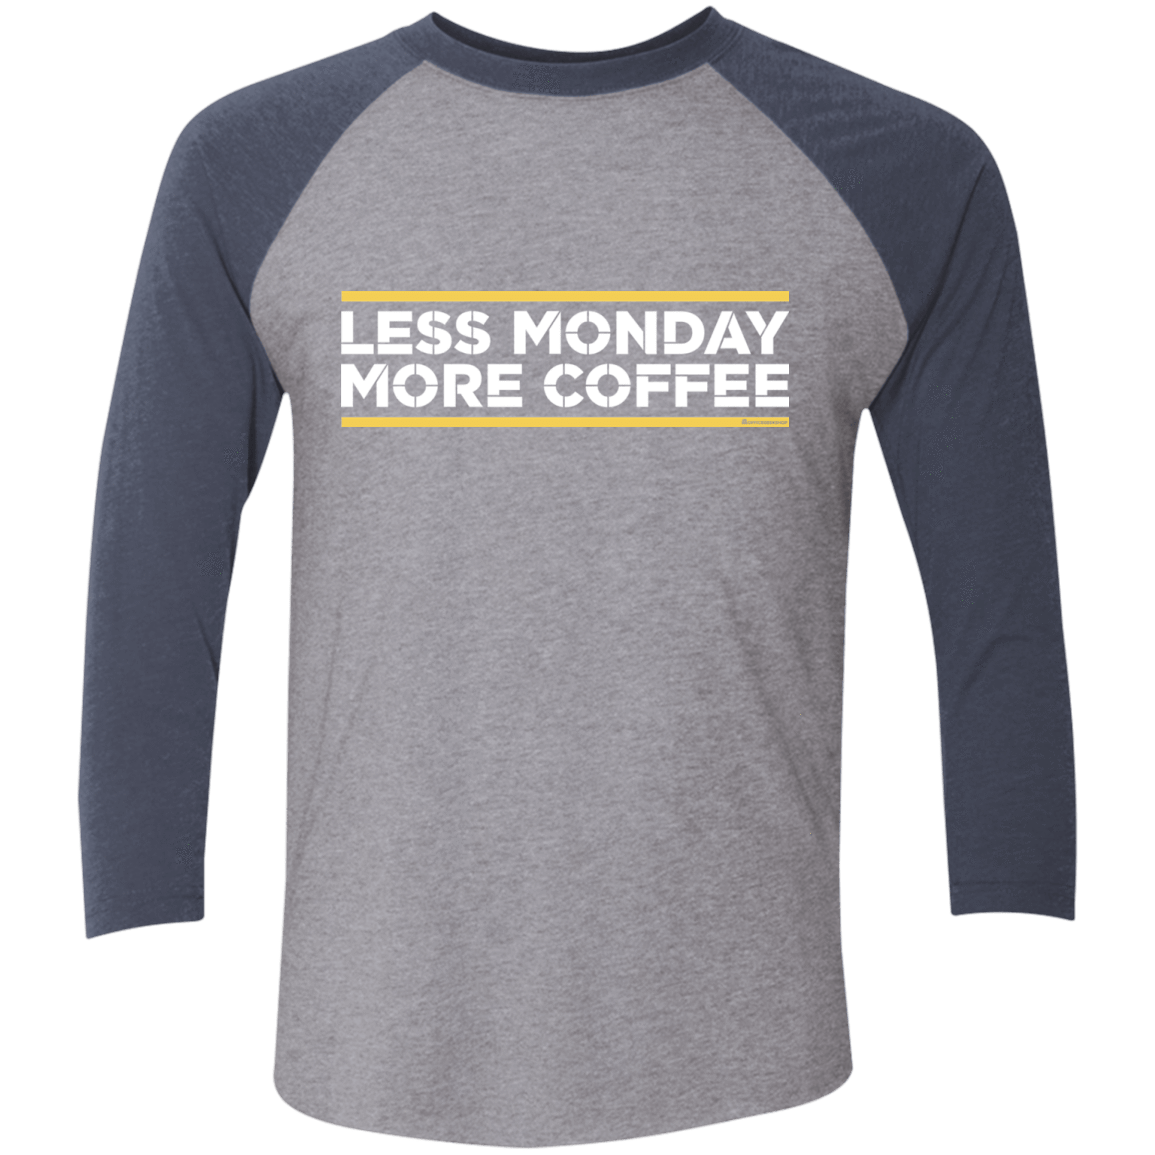 T-Shirts Premium Heather/Vintage Navy / X-Small Less Monday More Coffee Men's Triblend 3/4 Sleeve